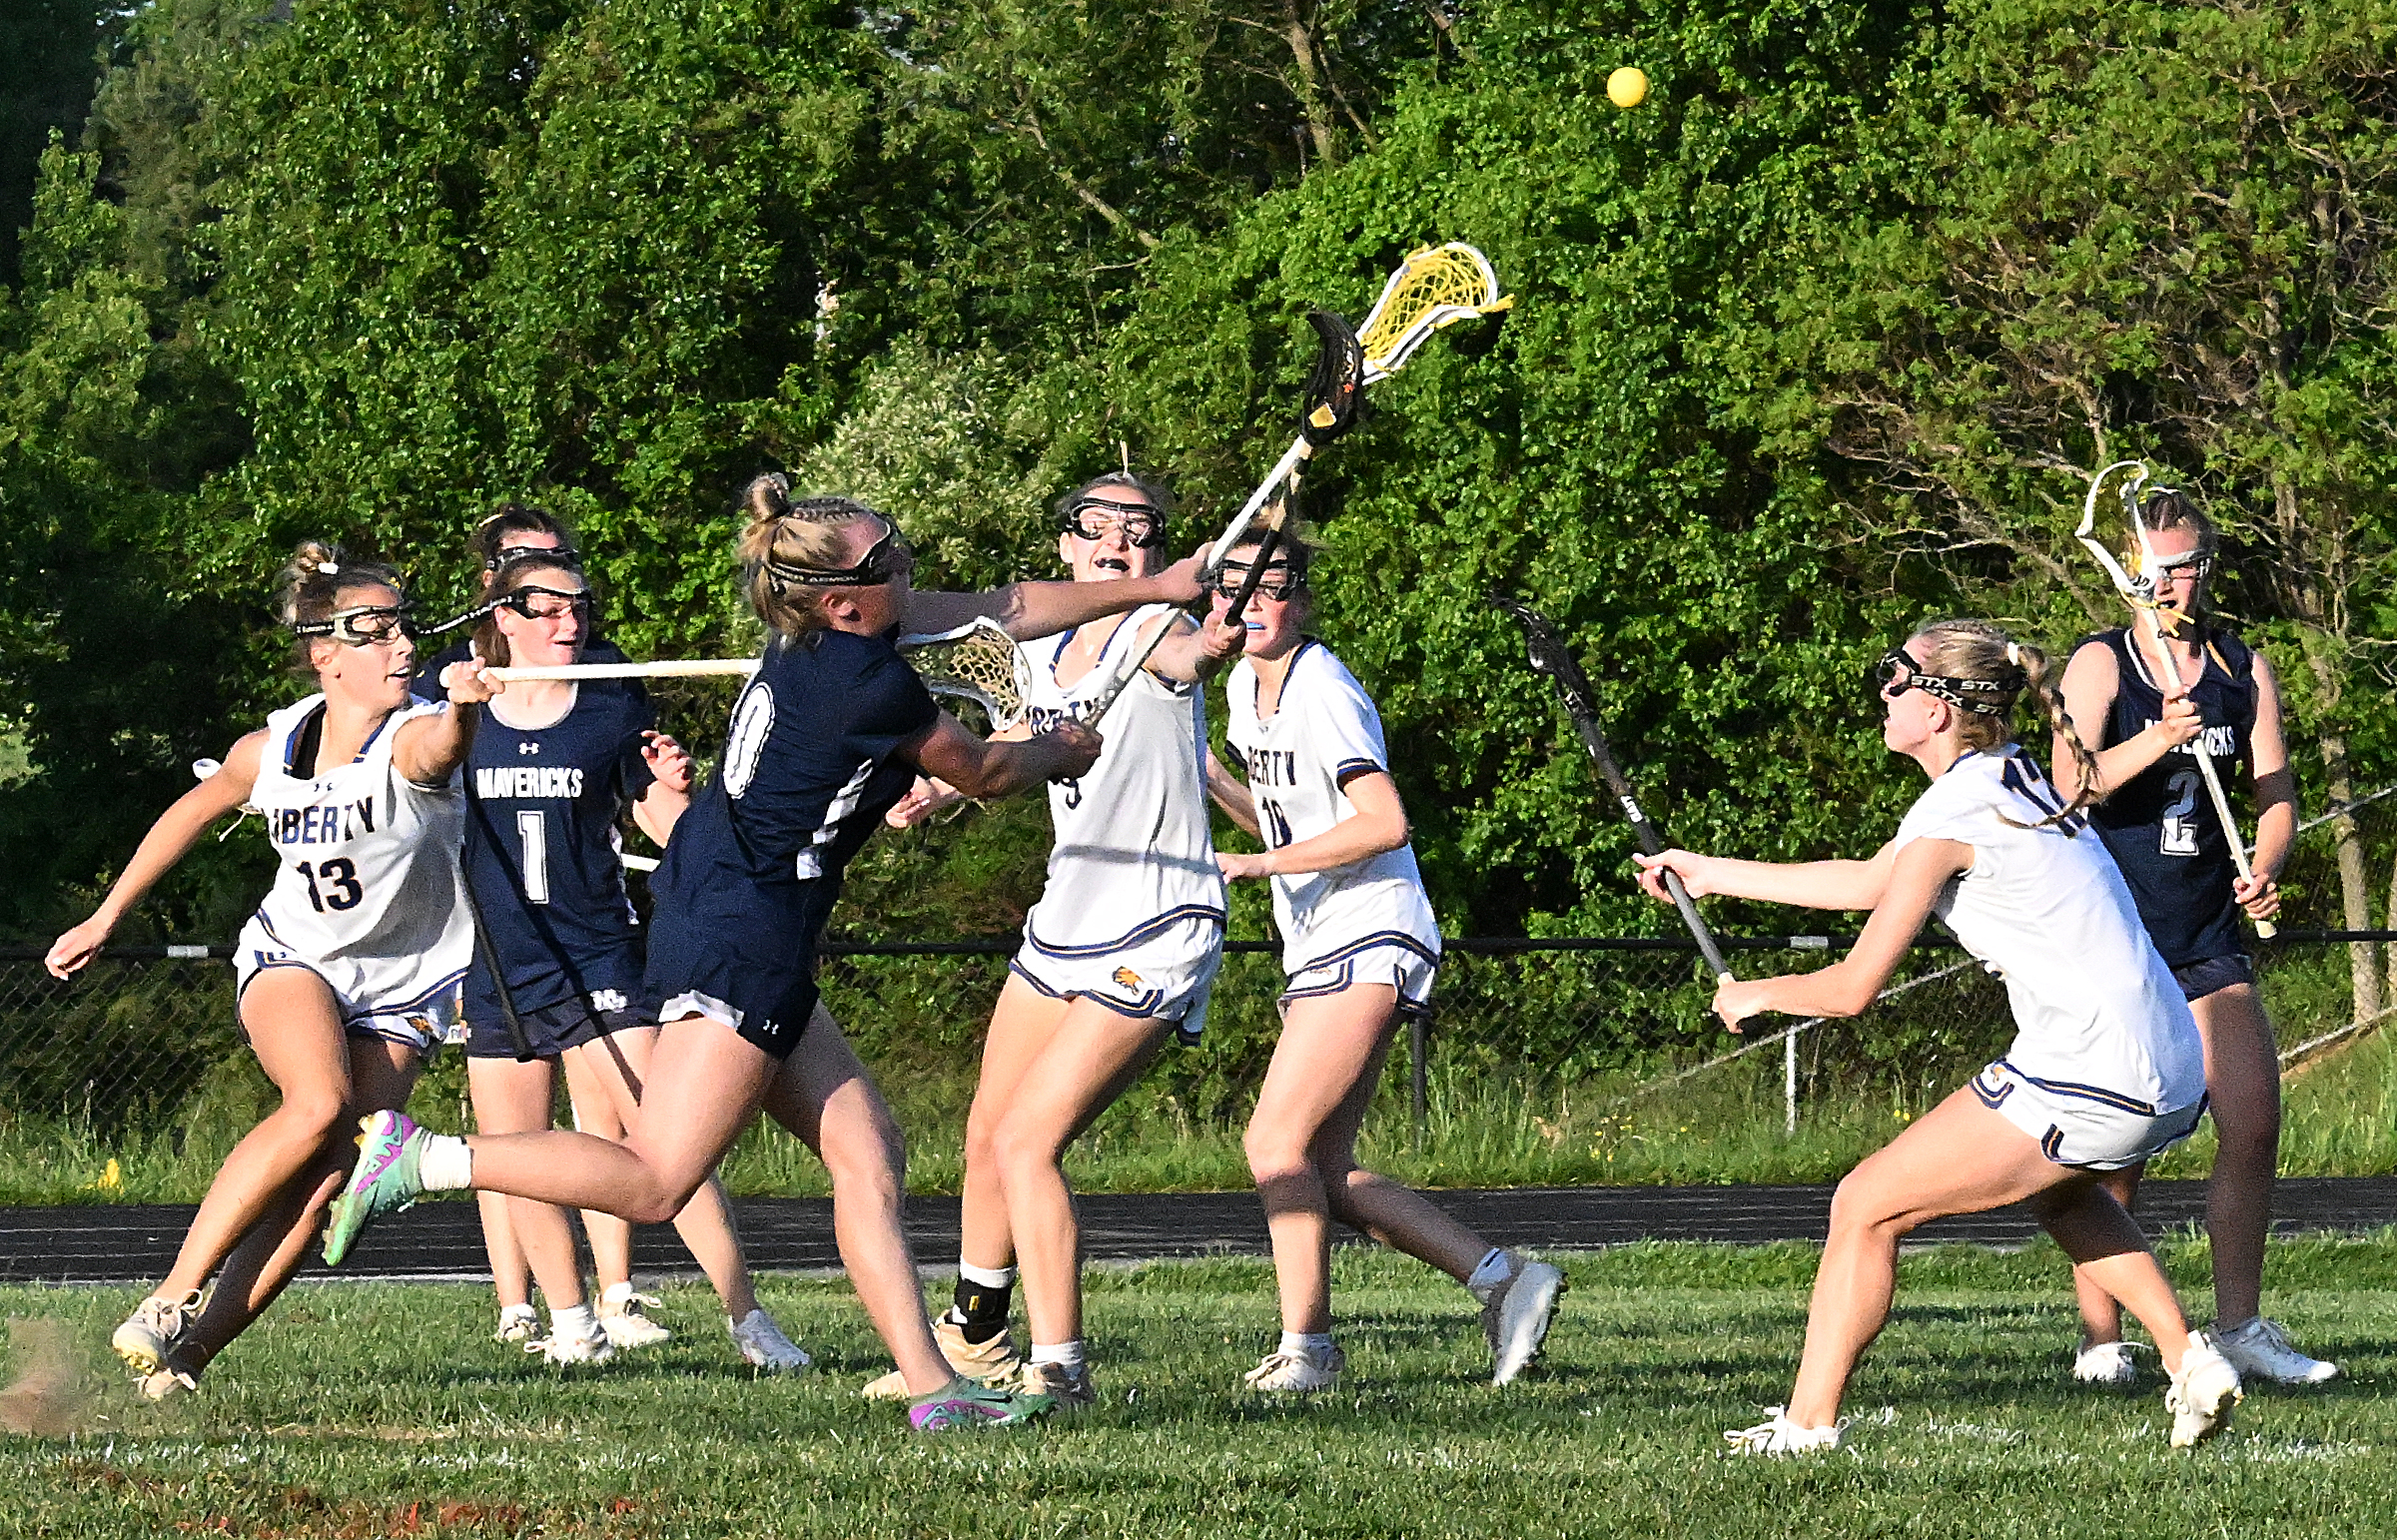 Manchester Valley #10, Emma Penczek shot on goal for a...